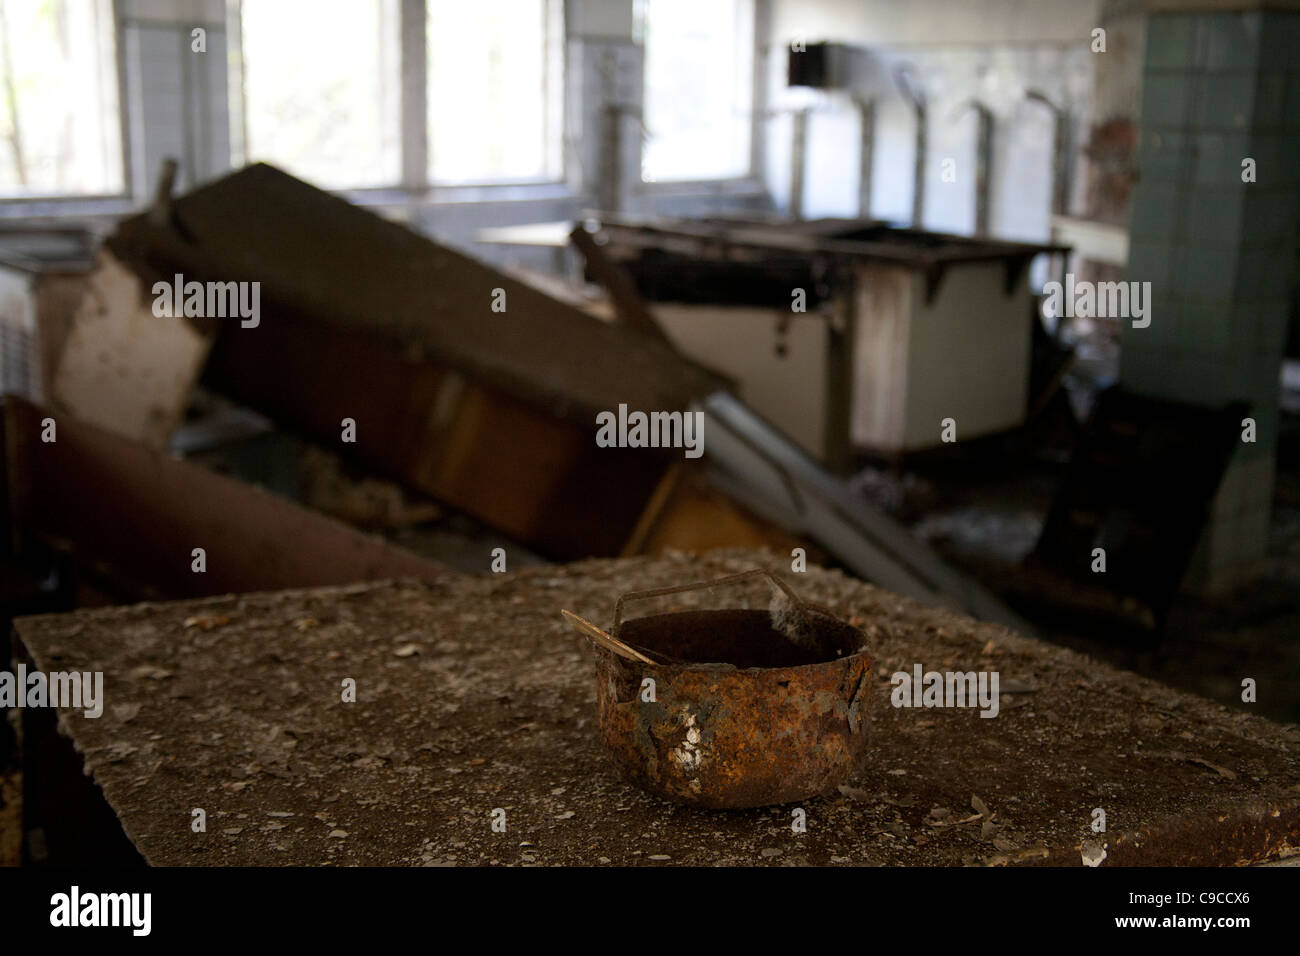 https://c8.alamy.com/comp/C9CCX6/rusted-pot-on-an-equally-rusted-table-in-the-kitchen-of-pripyat-middle-C9CCX6.jpg